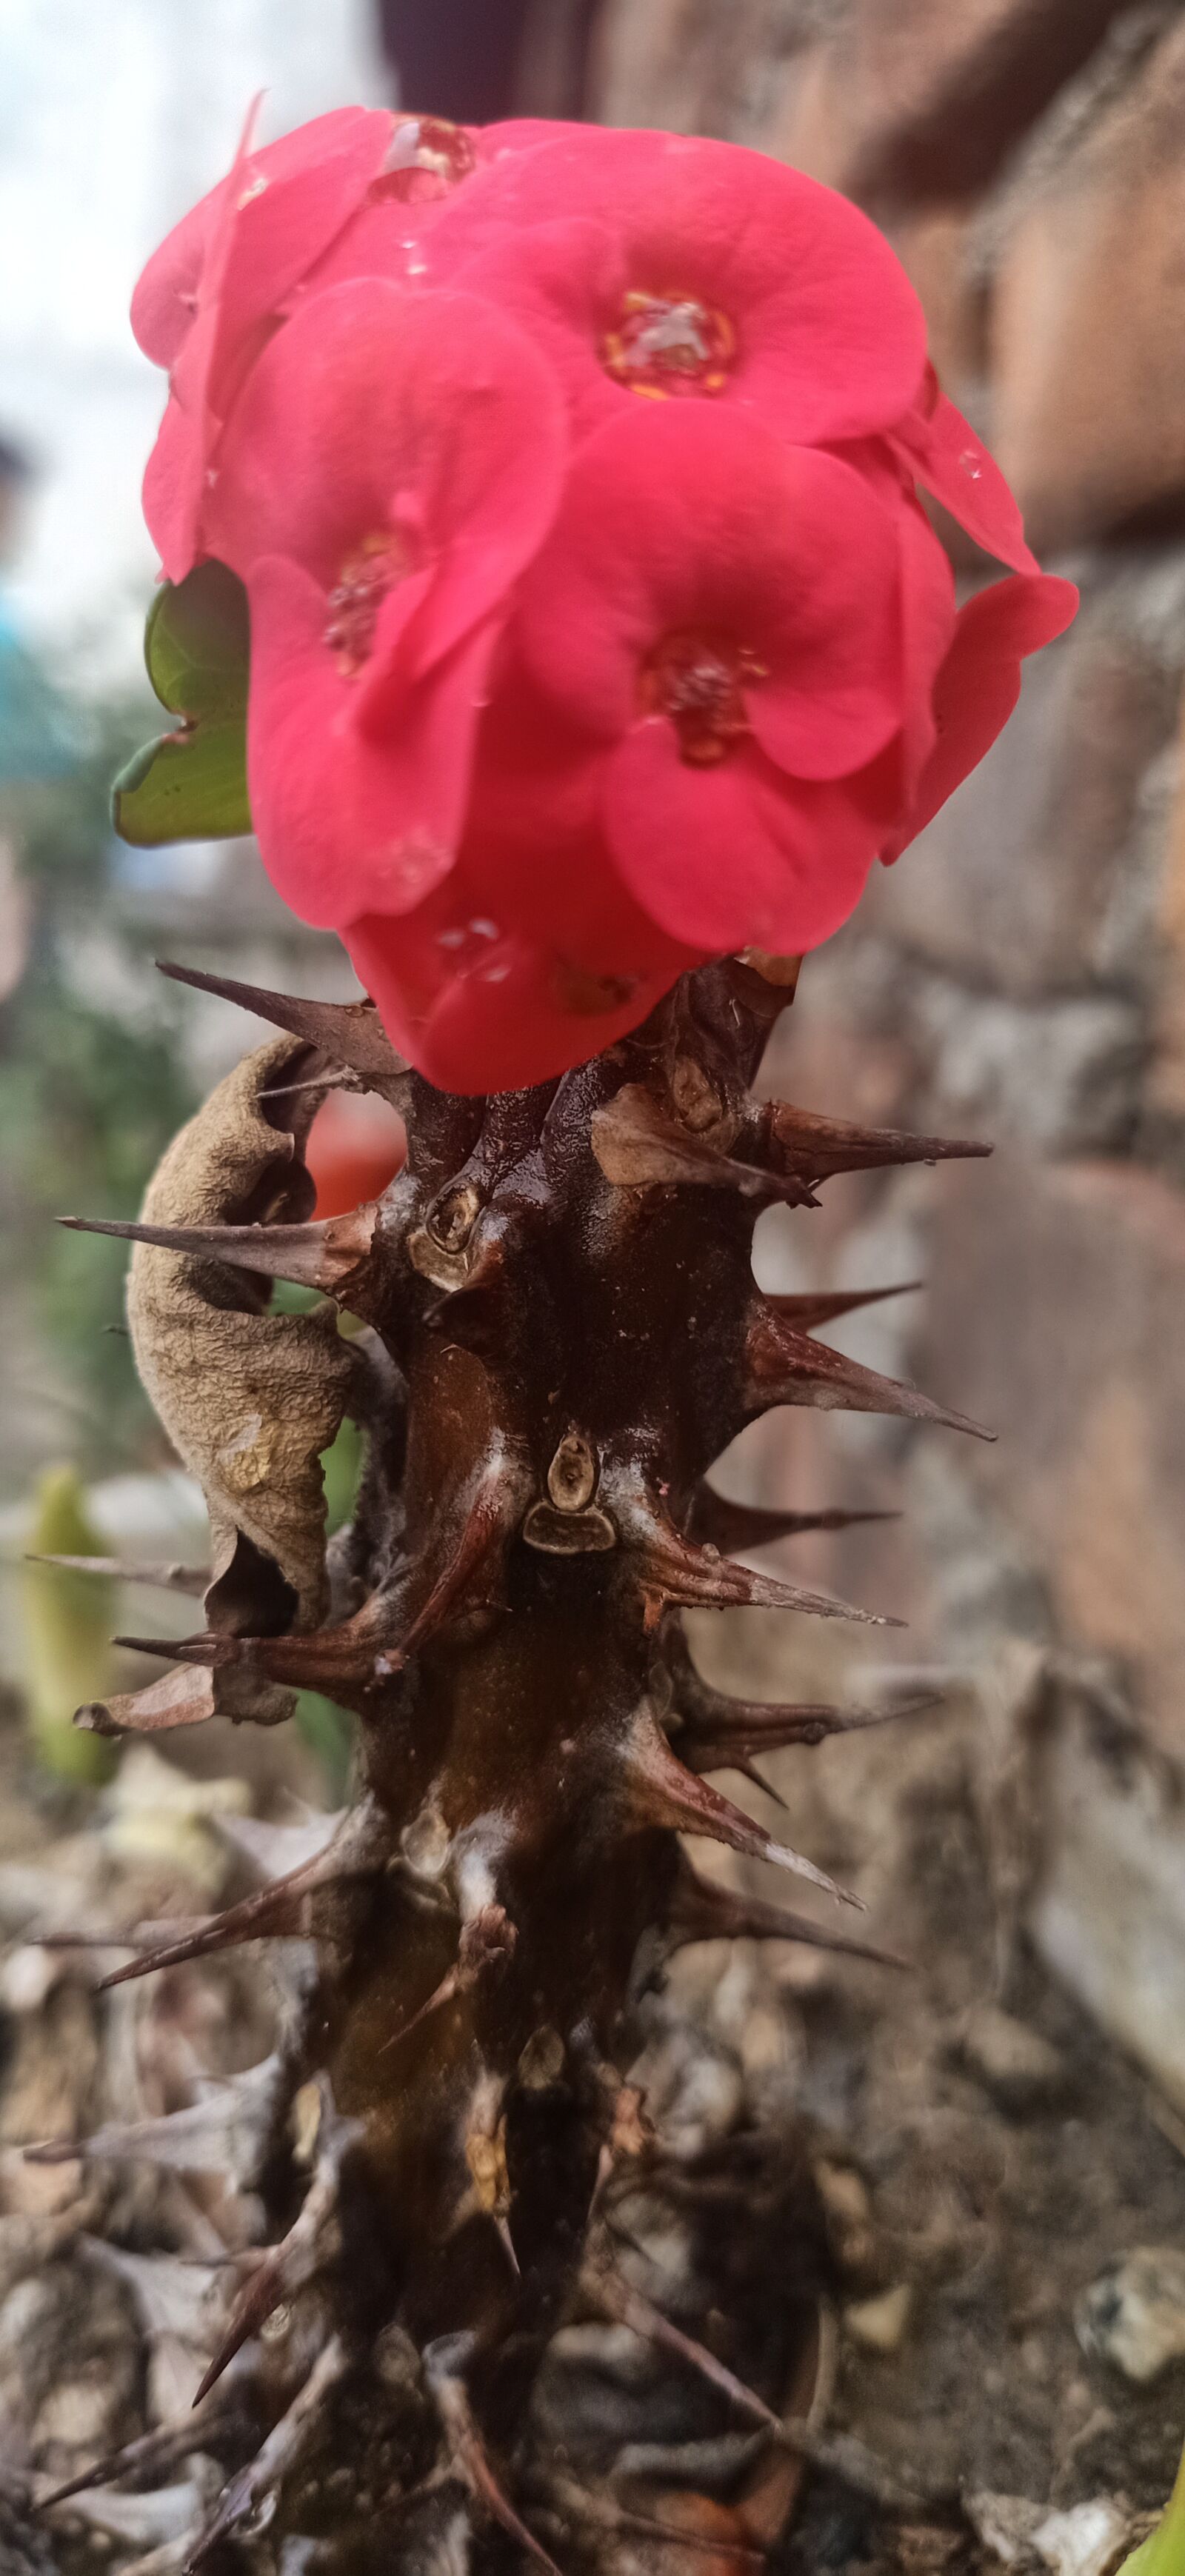 OPPO F11 sample photo. Flowers, nature, beauty photography